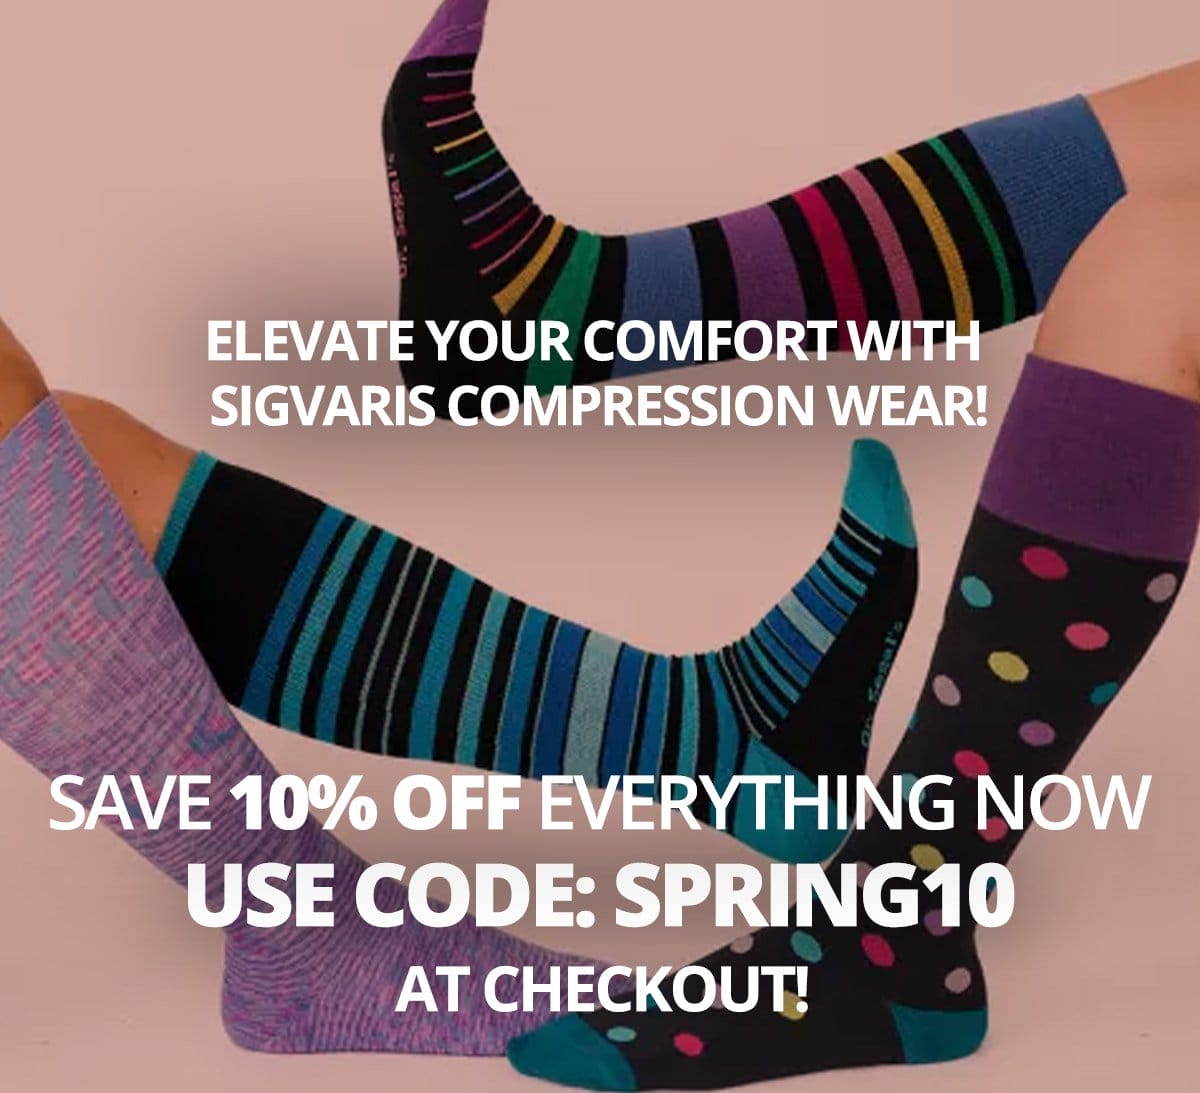 Elevate Your Comfort with Sigvaris Compression Wear! Save 10% OFF Everything Now! Use code: SPRING10 at checkout!